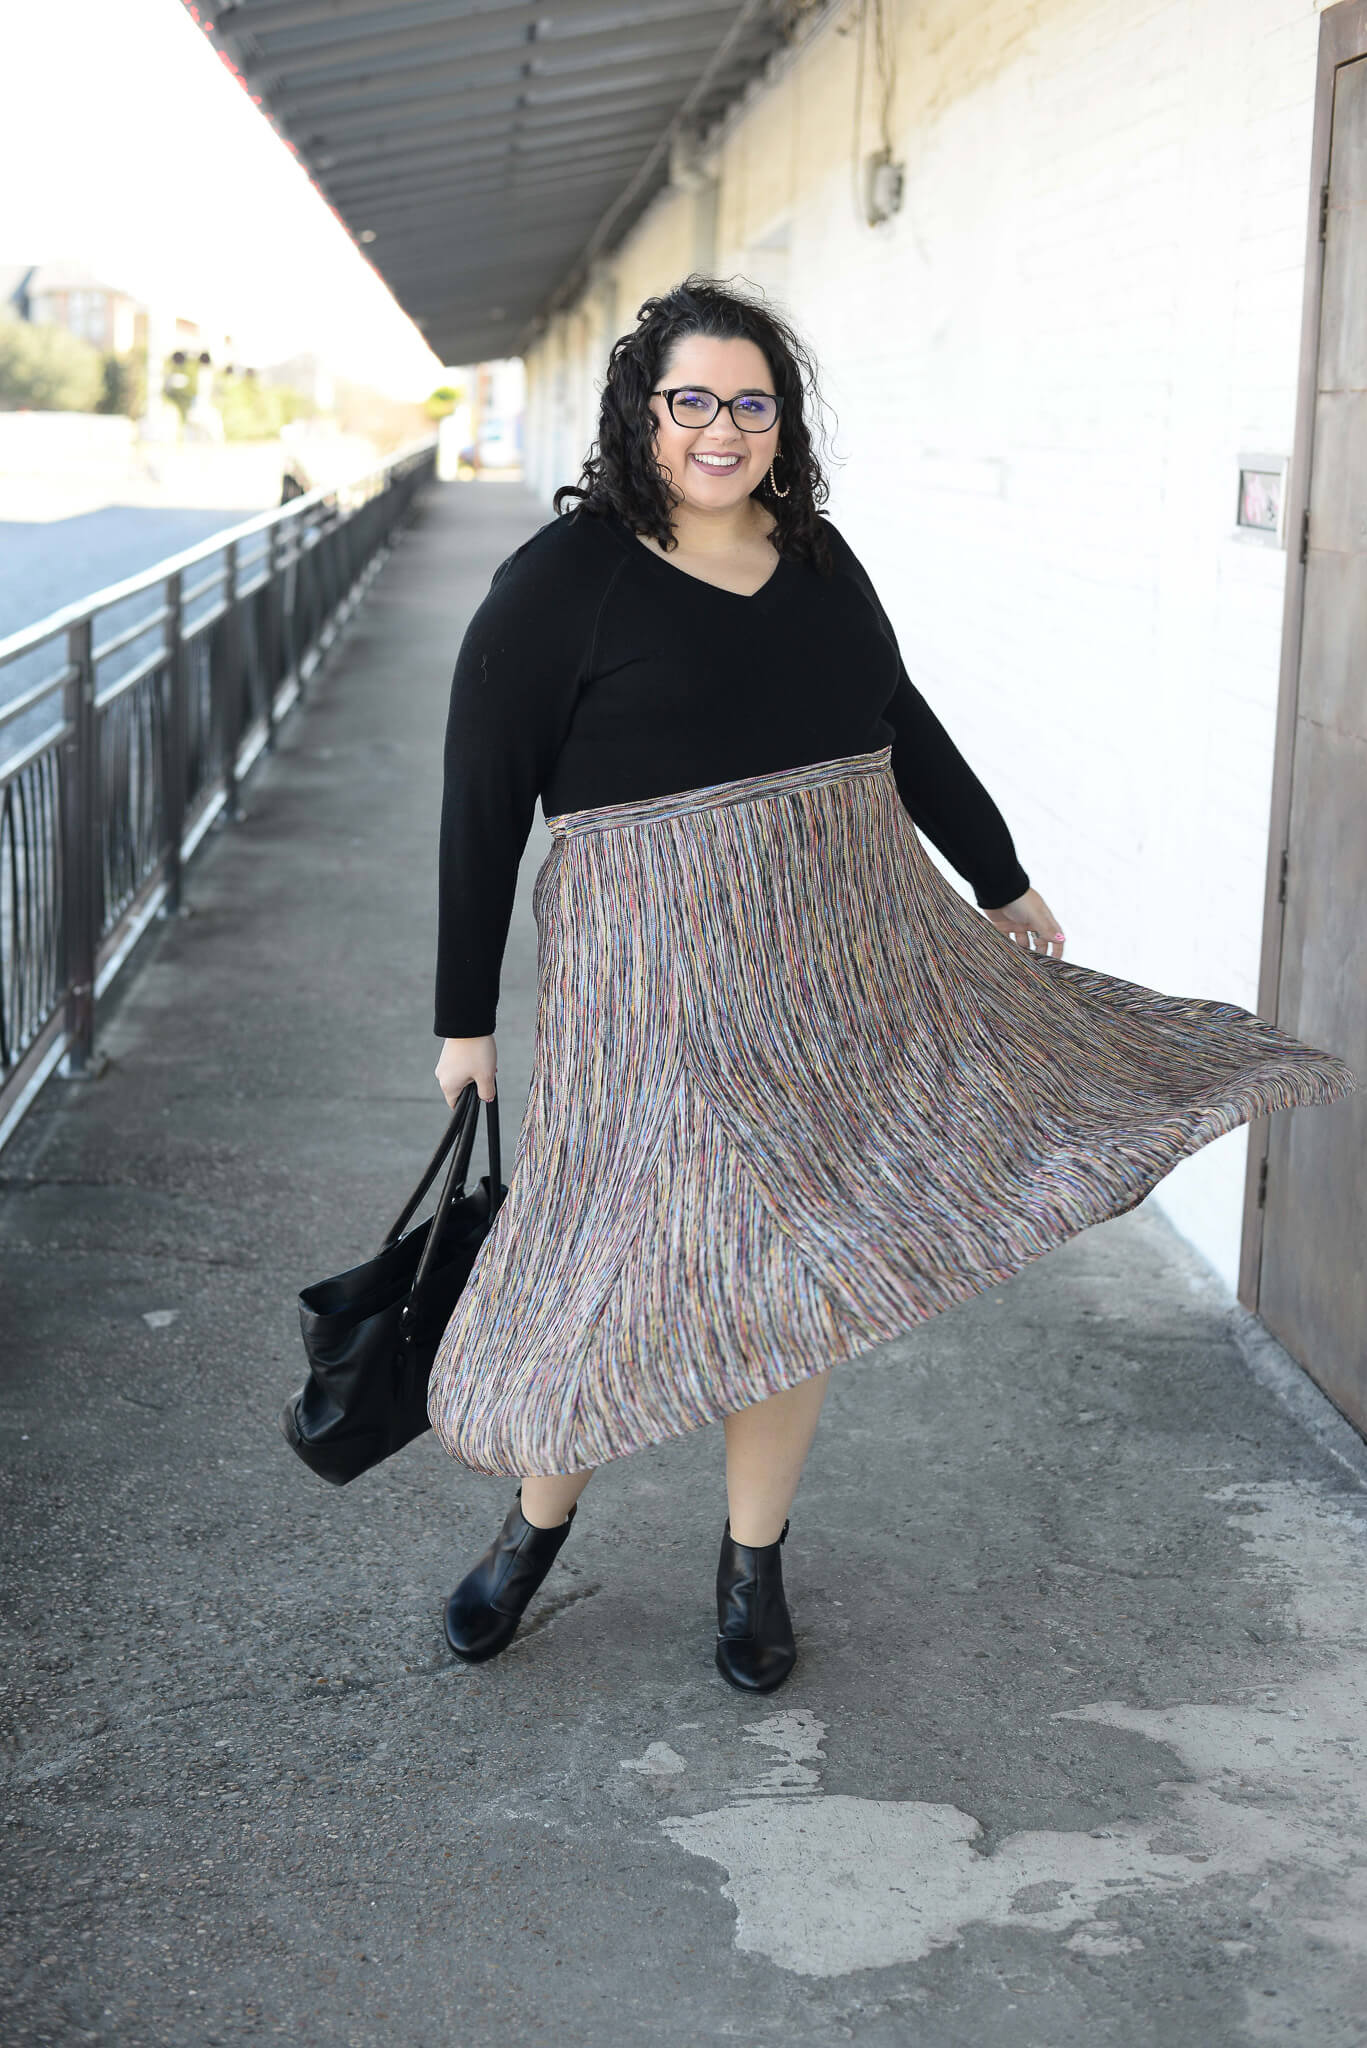 Heading into the office in a colorful plus size skirt 